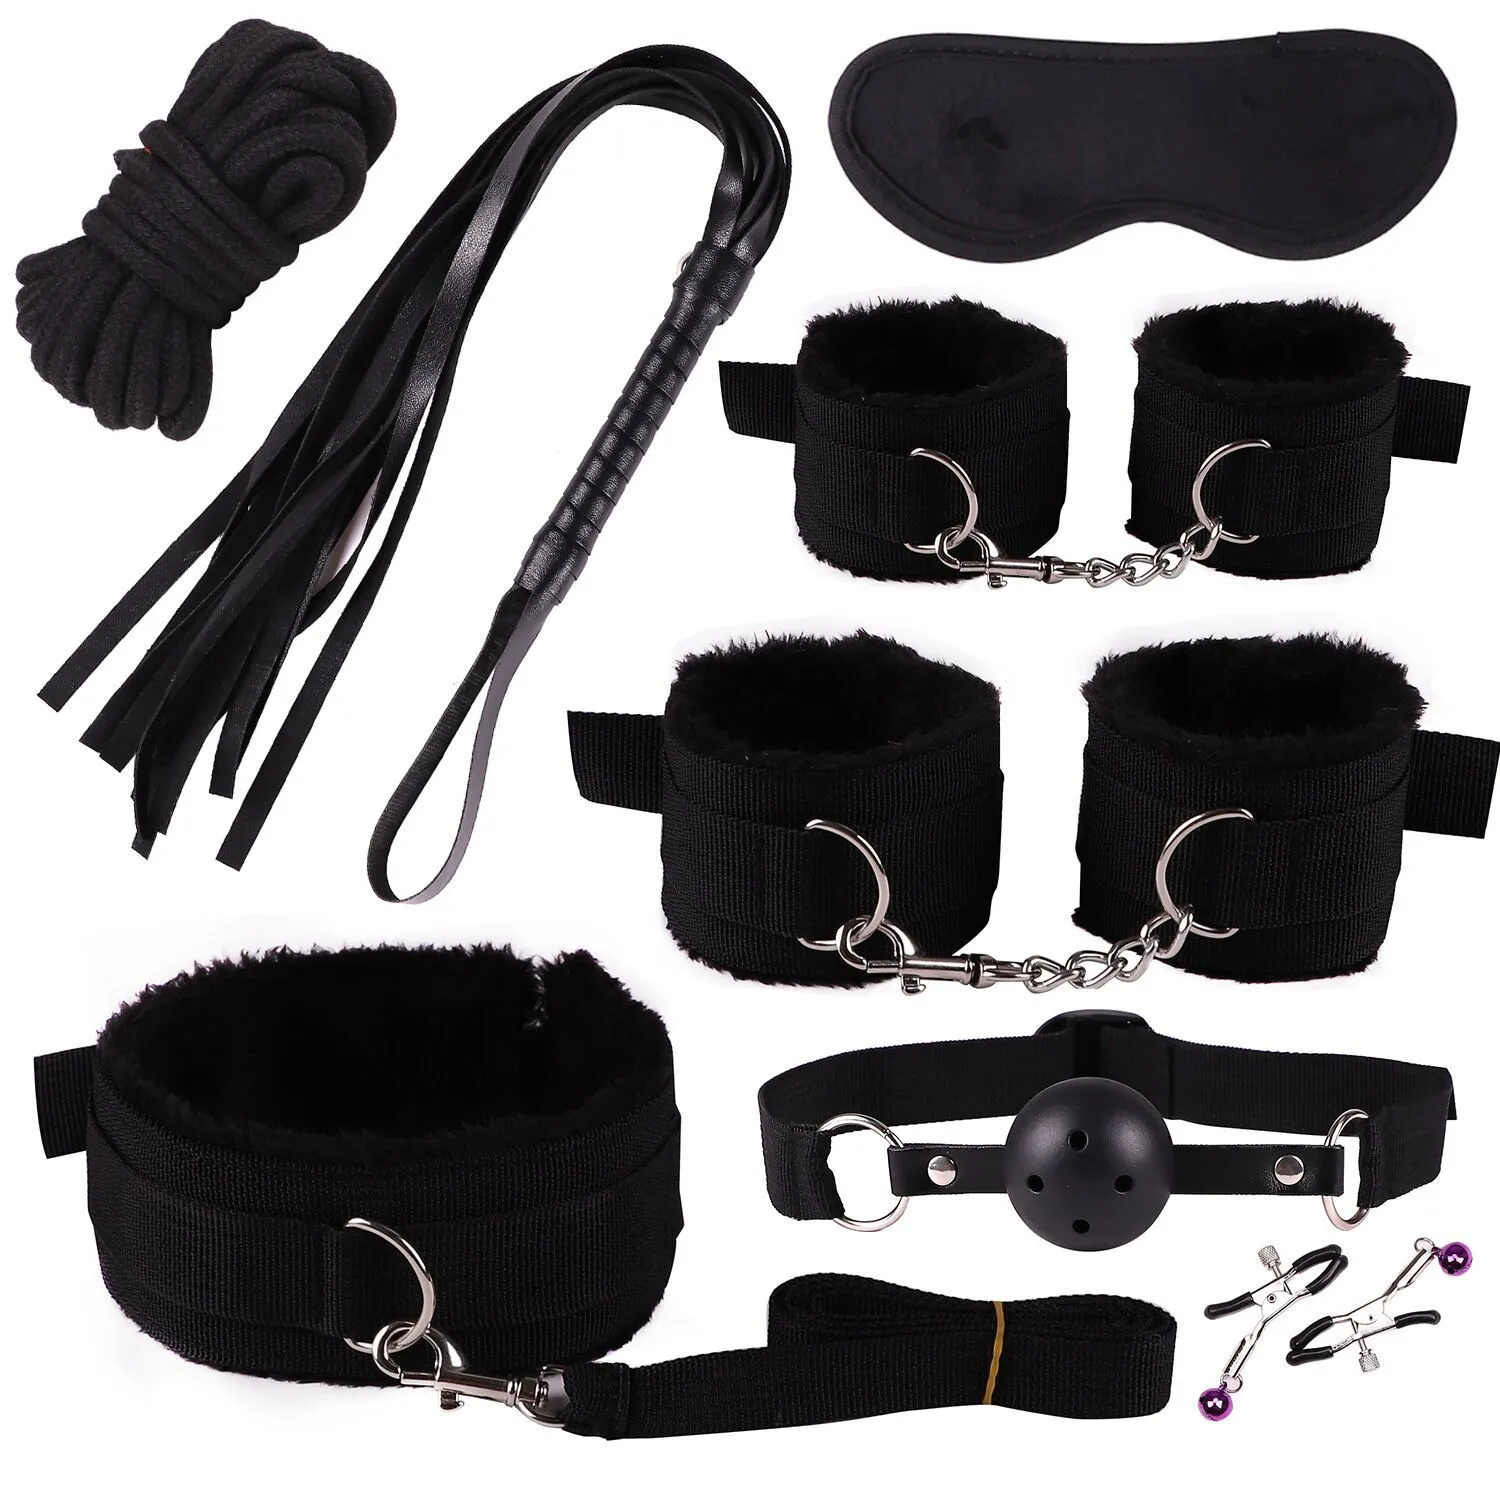 Restraints For Sex, PALOQUETH BDSM Toys Leather Bondage Sets Restraint Kits  Sex Things For Couples. From Sexaidhome, $17.28